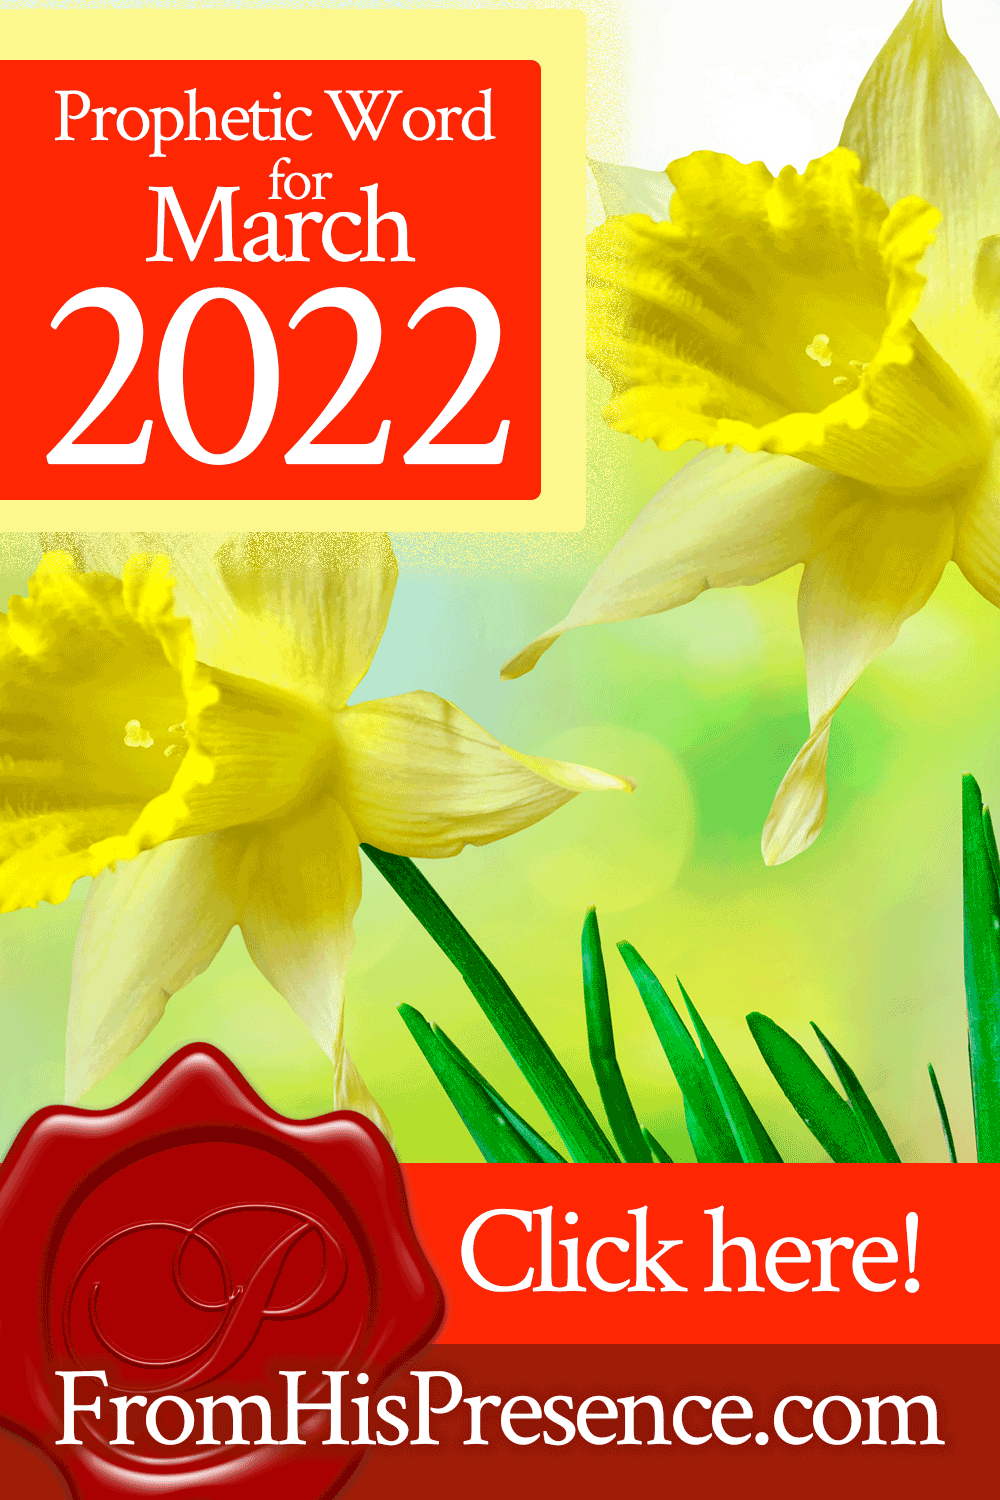 Prophetic Word for March 2022 | by Jamie Rohrbaugh | FromHisPresence.com